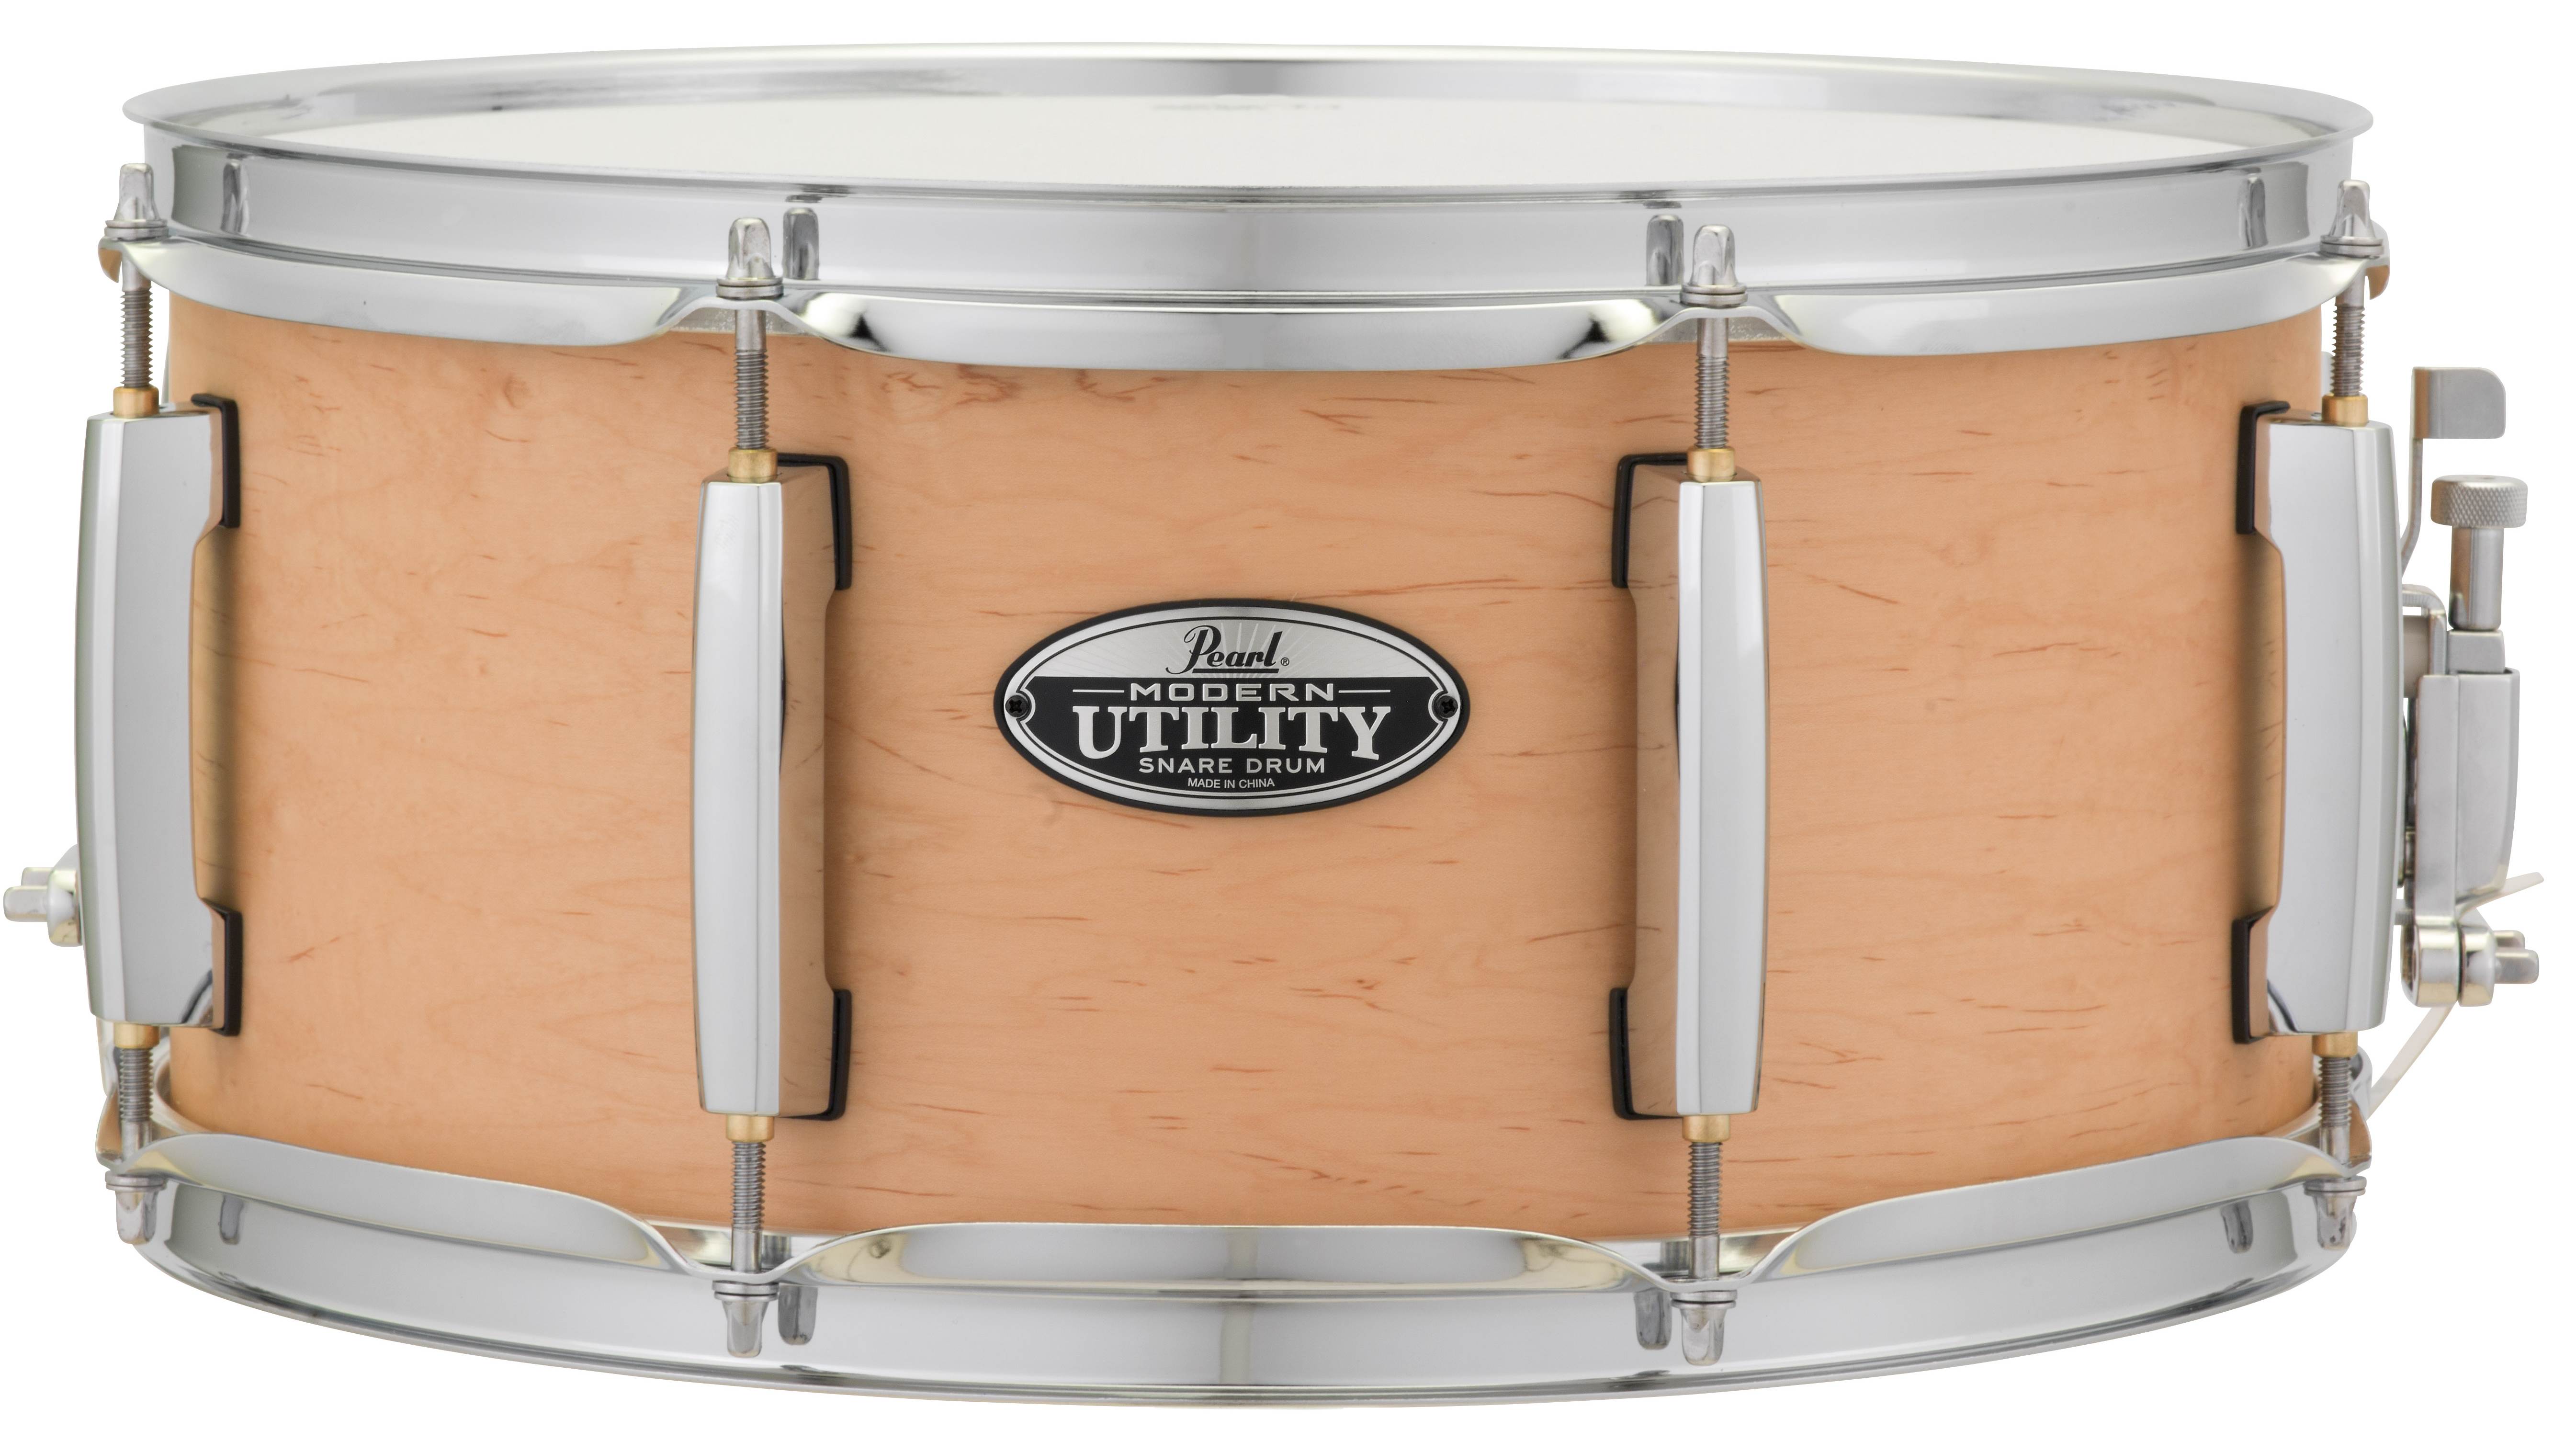 MODERN UTILITY SNARE DRUMS